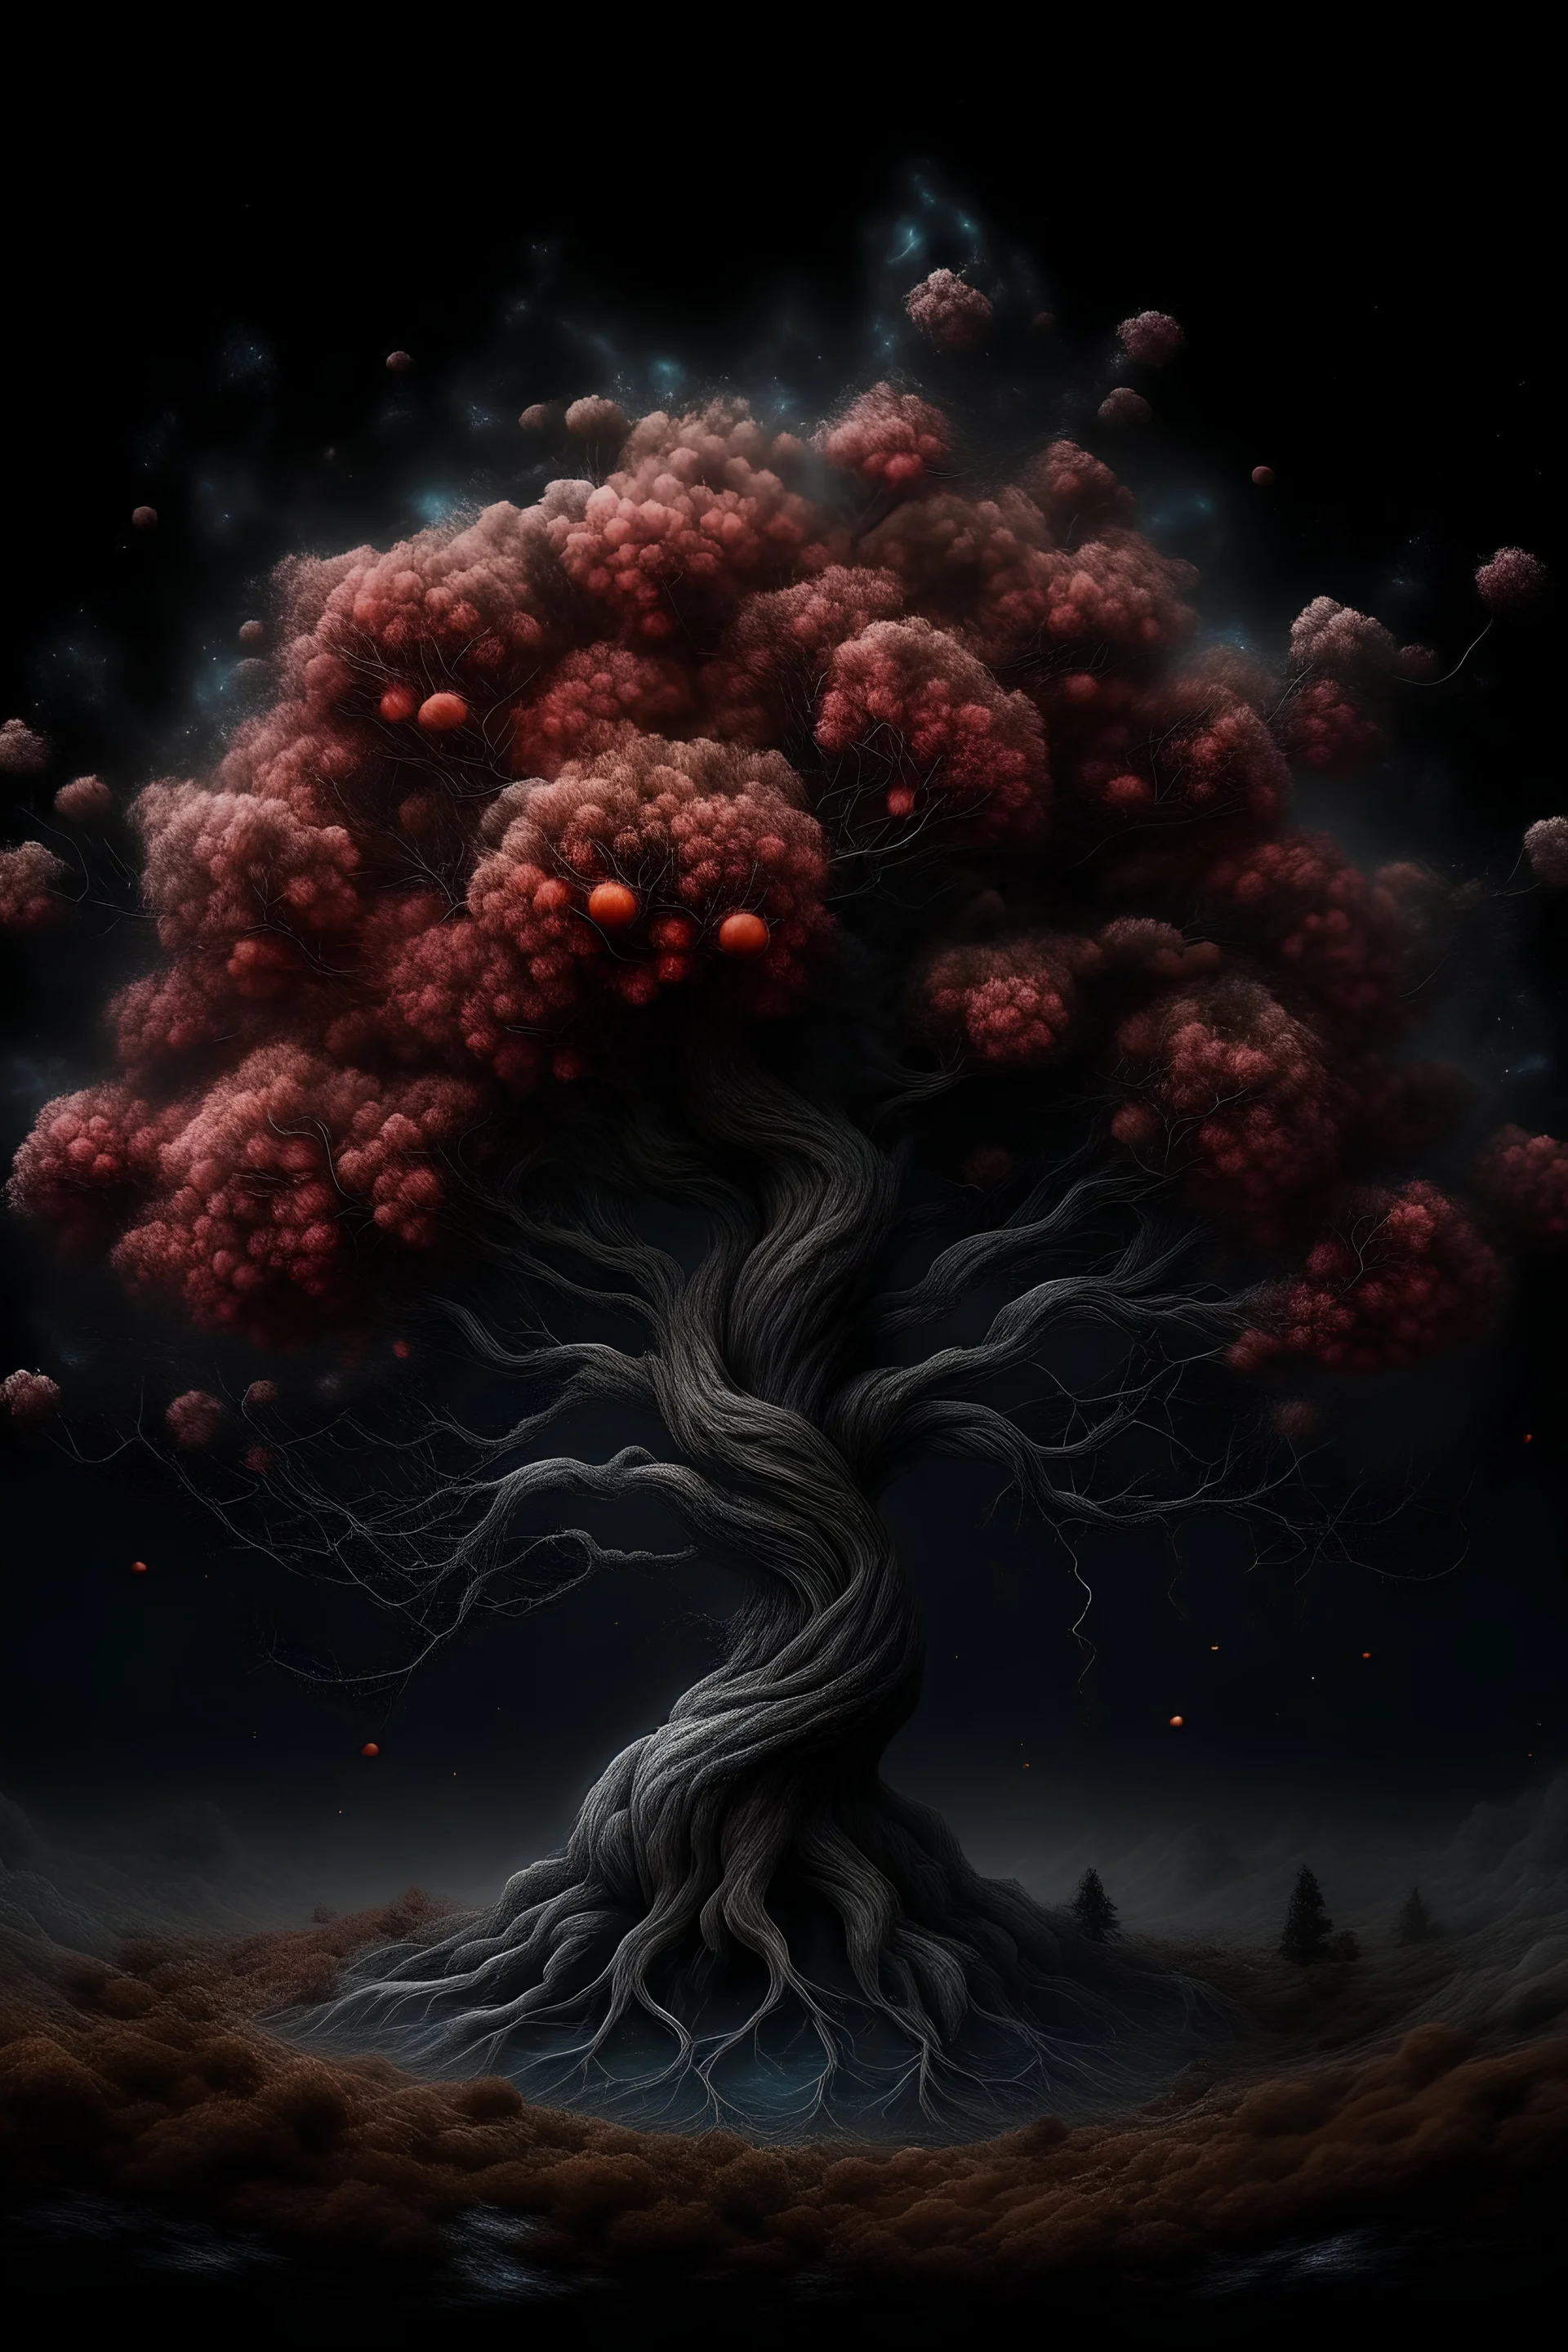 gothic, epic, fabulous, ancient tree with a lush crown, Inferno sakura, snow, hyperrealism, microdetalization, surreal, drawing details, clear outline, color illustration, aesthetics, stardust, mystical landscape, horror, noir, gloomy atmosphere, clouds, Space, Planets, comets, dark botanical, dark fantasy, multicolor, detailed,36d,threads, fibers, star map, horror aesthetics, mint, pink, fantastic flowers, ambient clarity, volumetric, fog, white haze, crystals